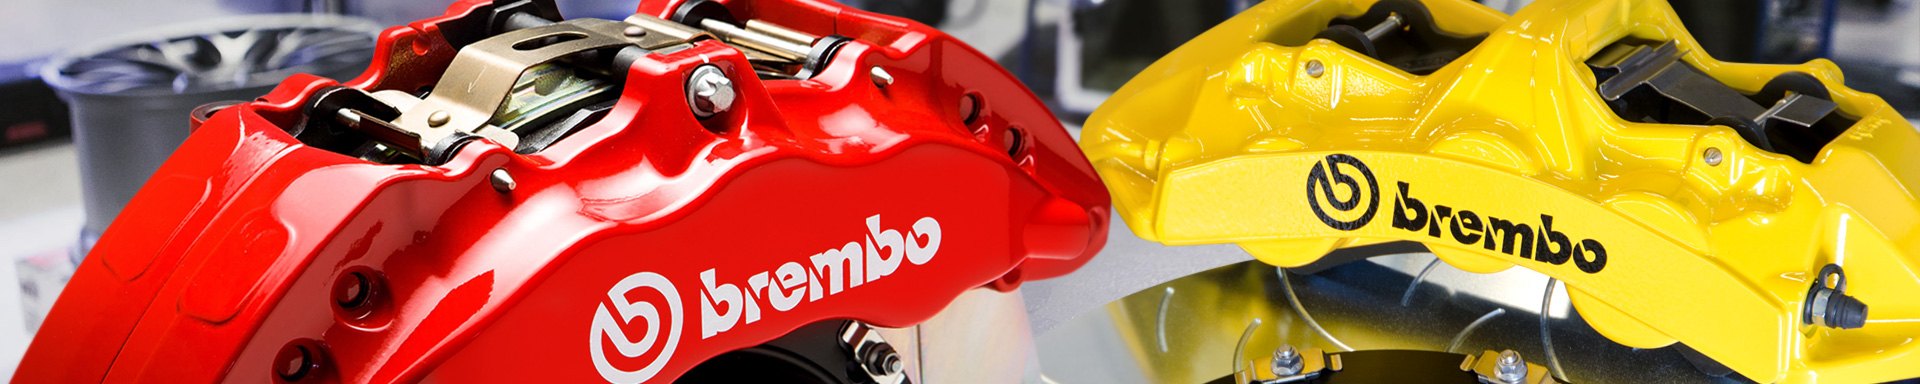 Brembo Oils & Chemicals